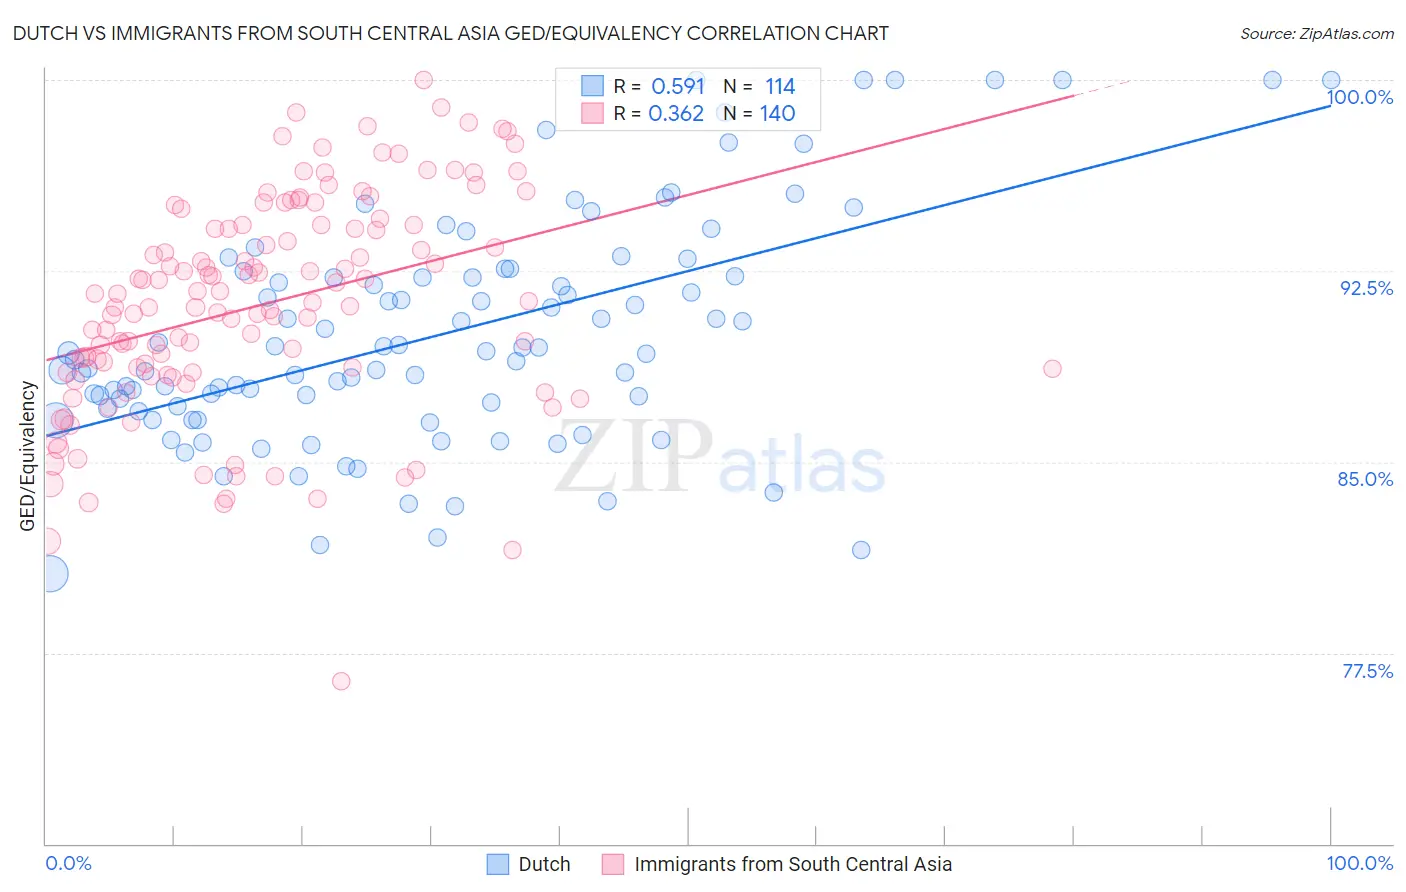 Dutch vs Immigrants from South Central Asia GED/Equivalency